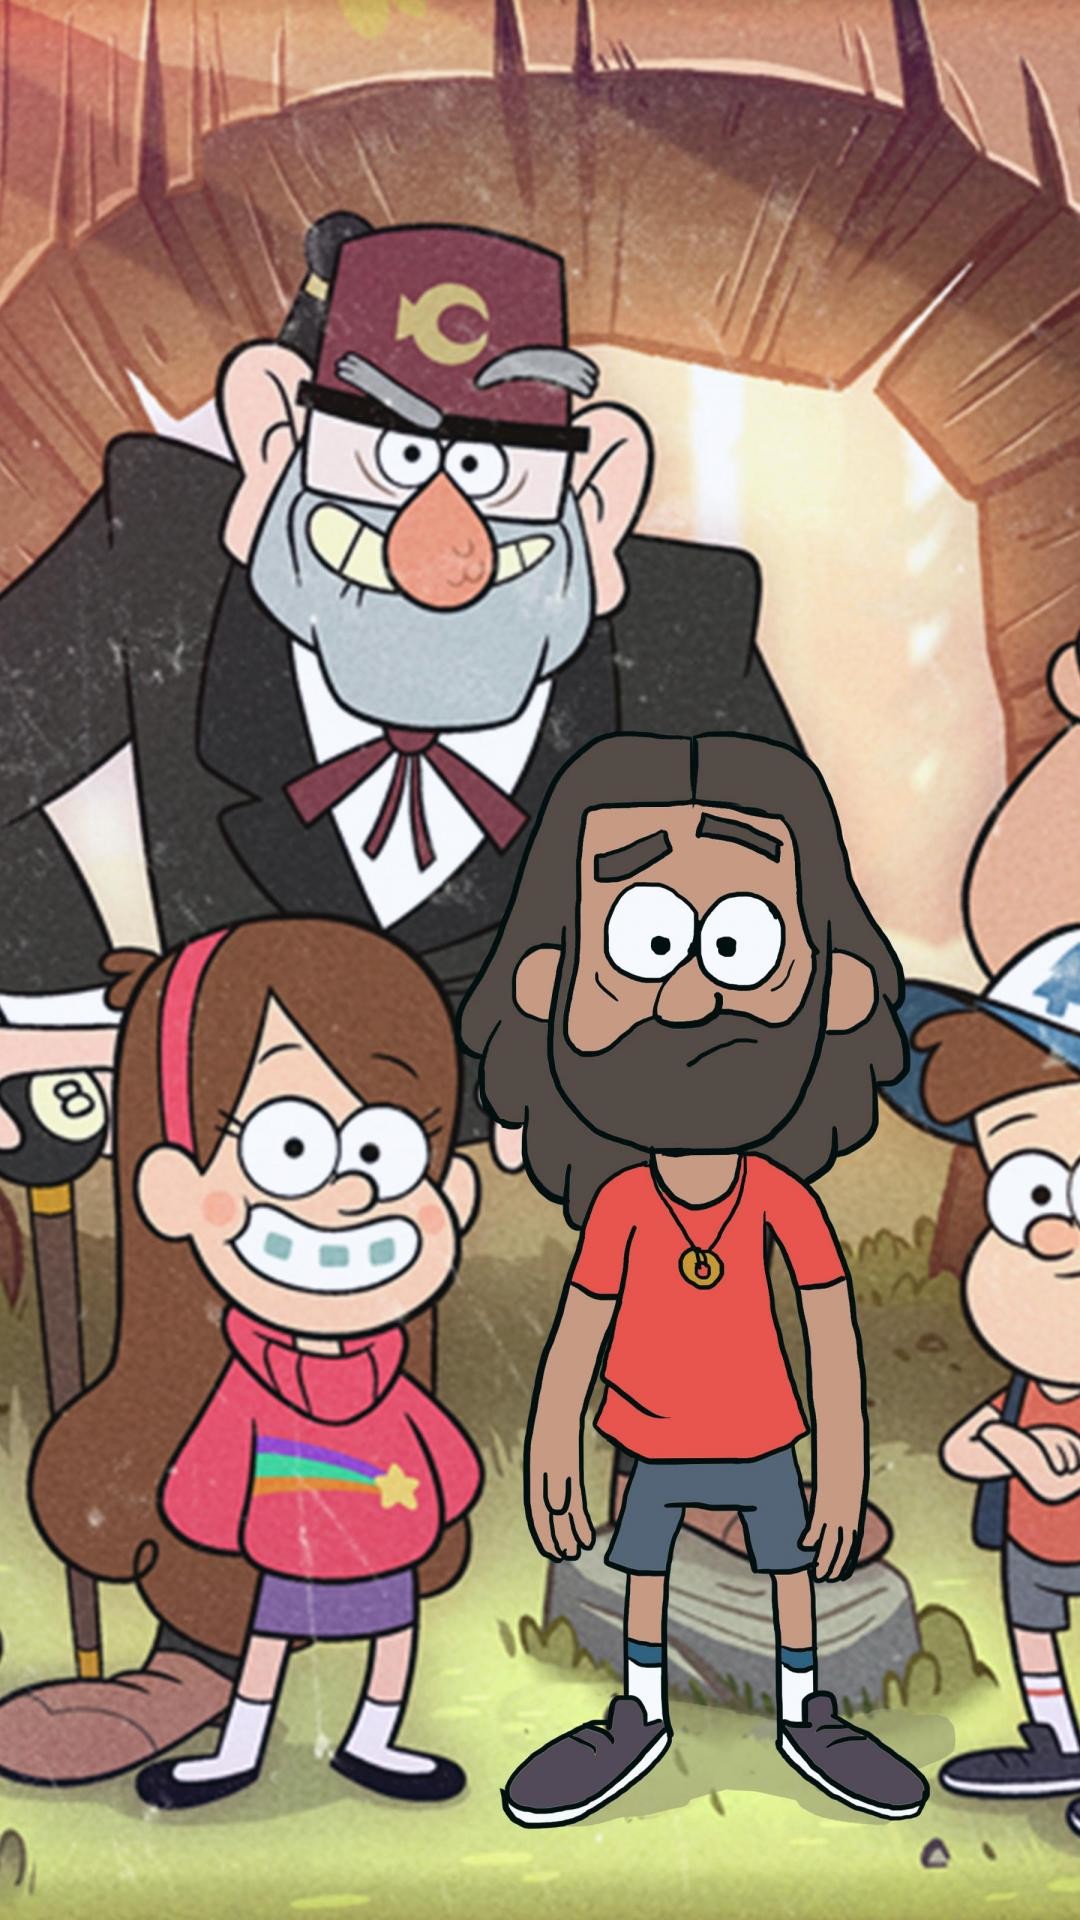 1080x1920 Gravity Falls IPhone Wallpaper, Images, Wallpapers of Gravity .